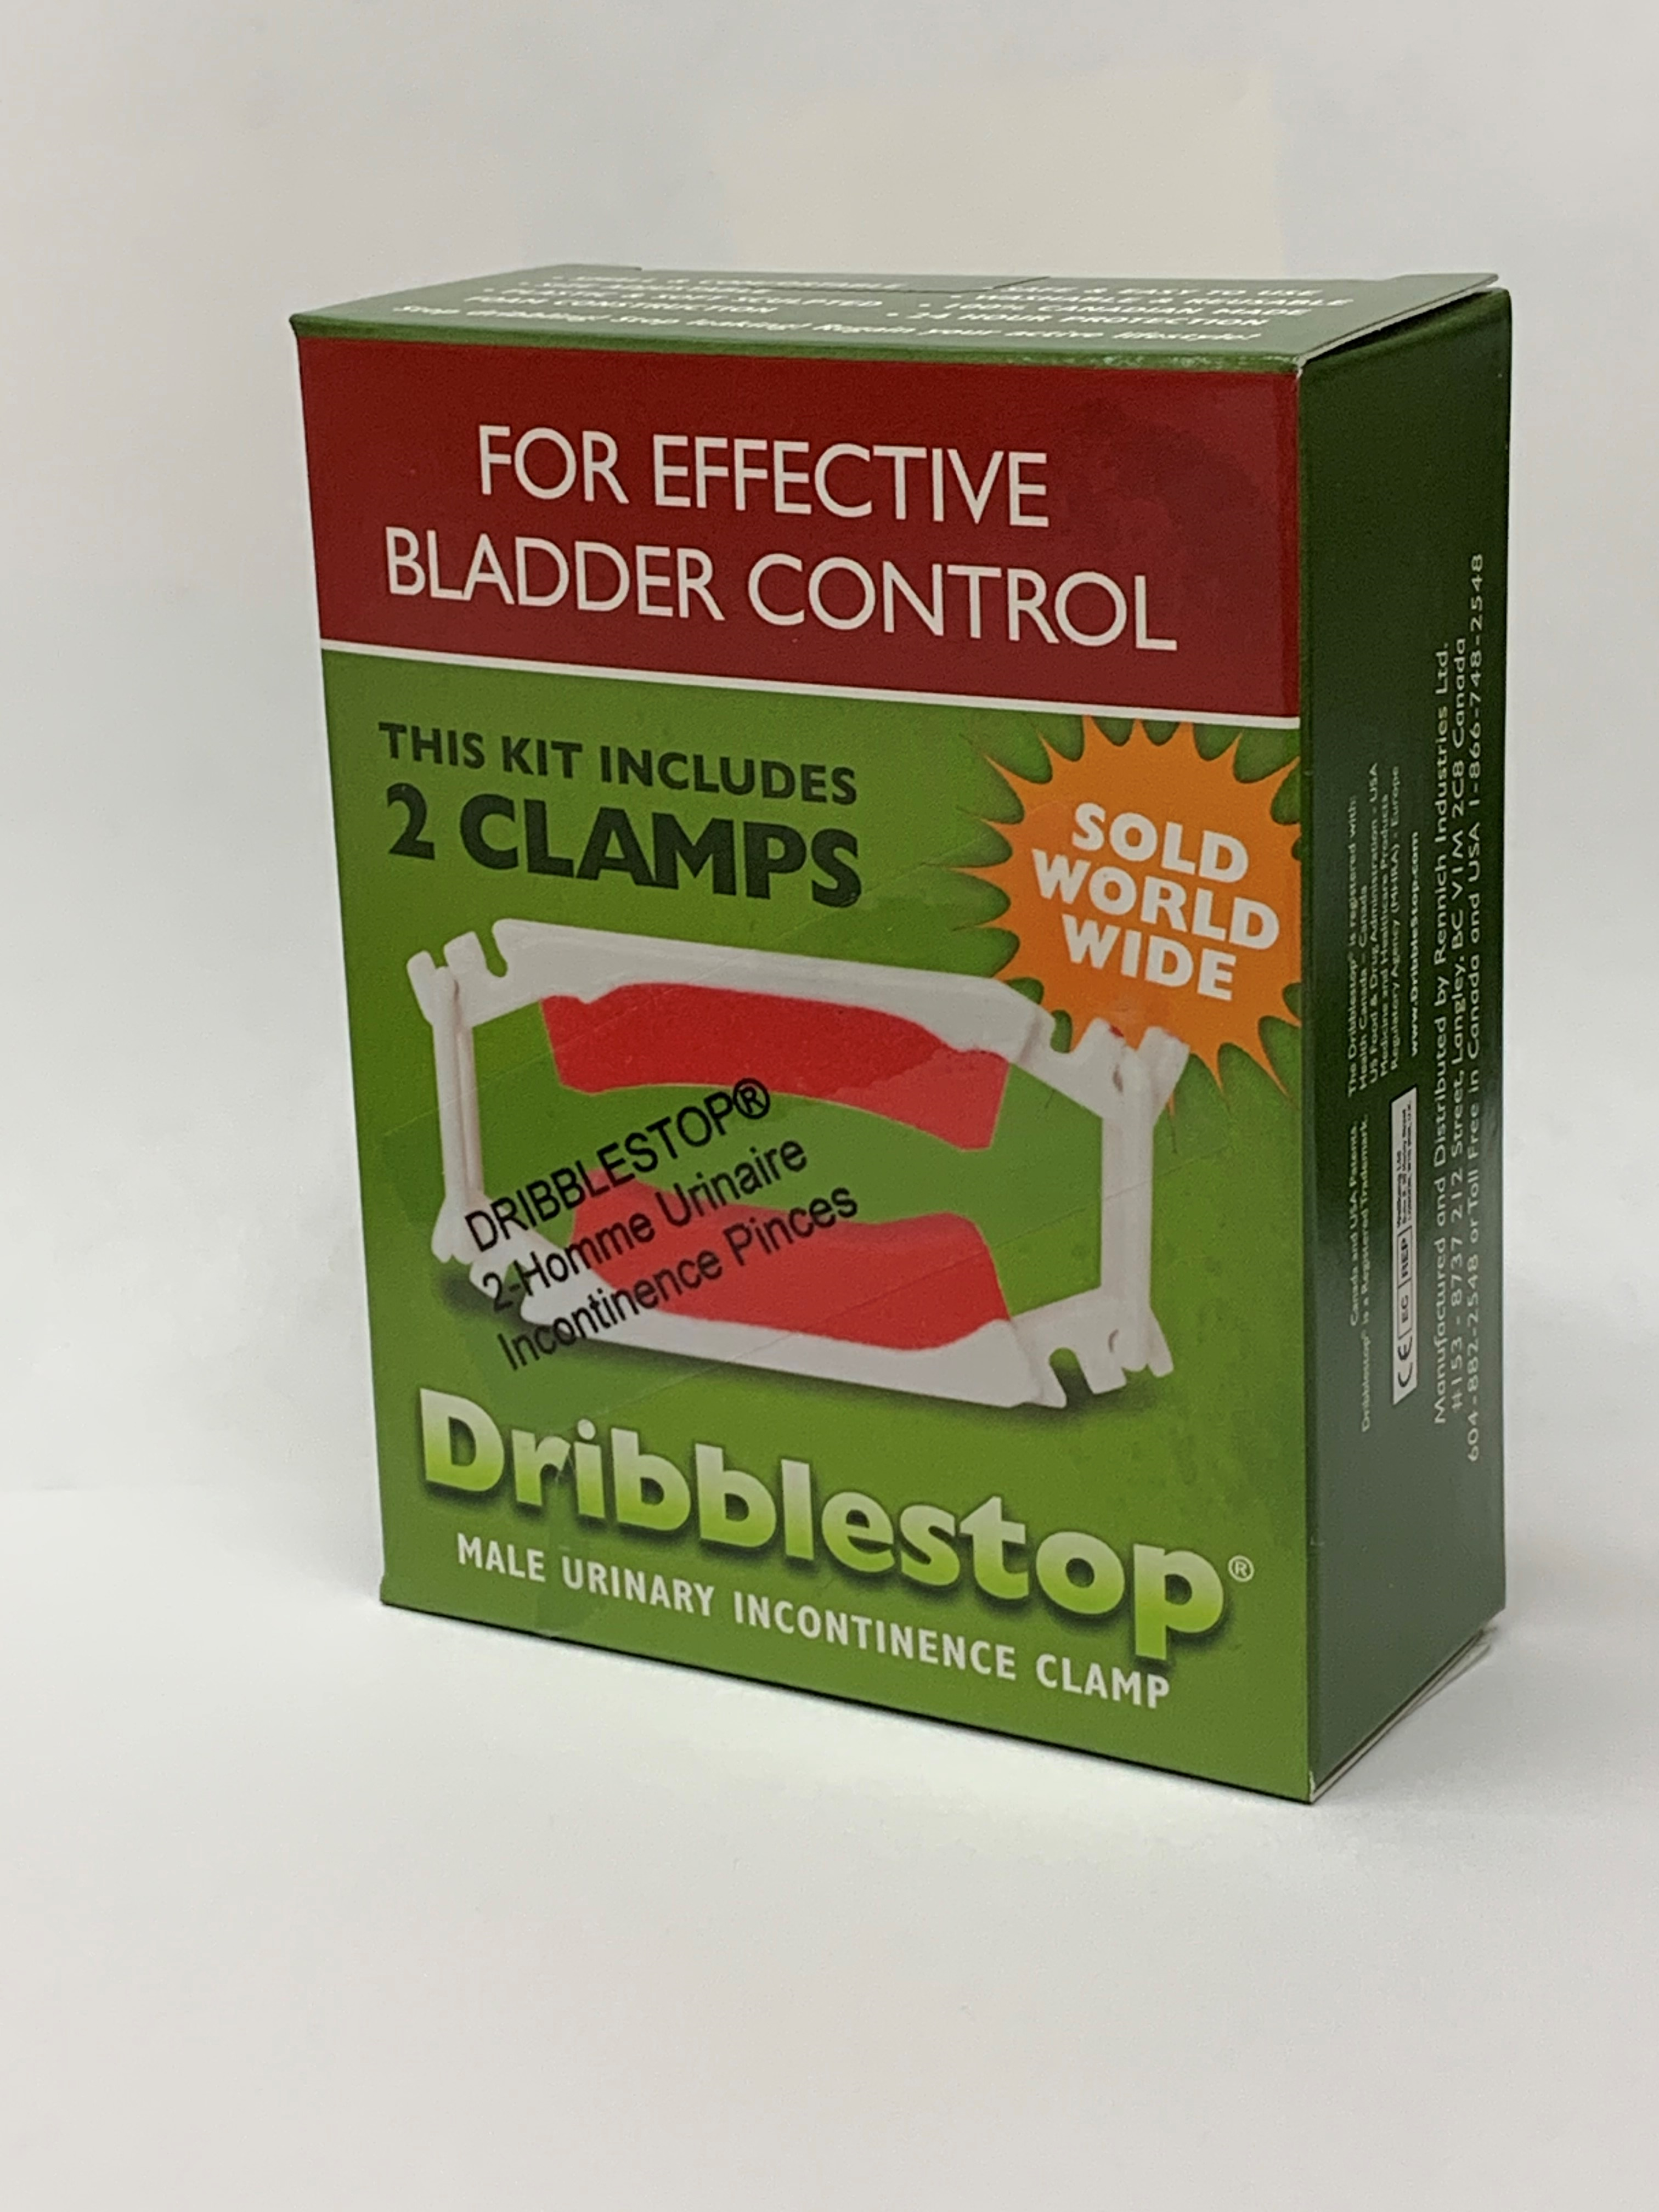 Dribblestop - Male Urinary Incontinence Clamp - Cooper Medical - Medical  Supplies Kelowna